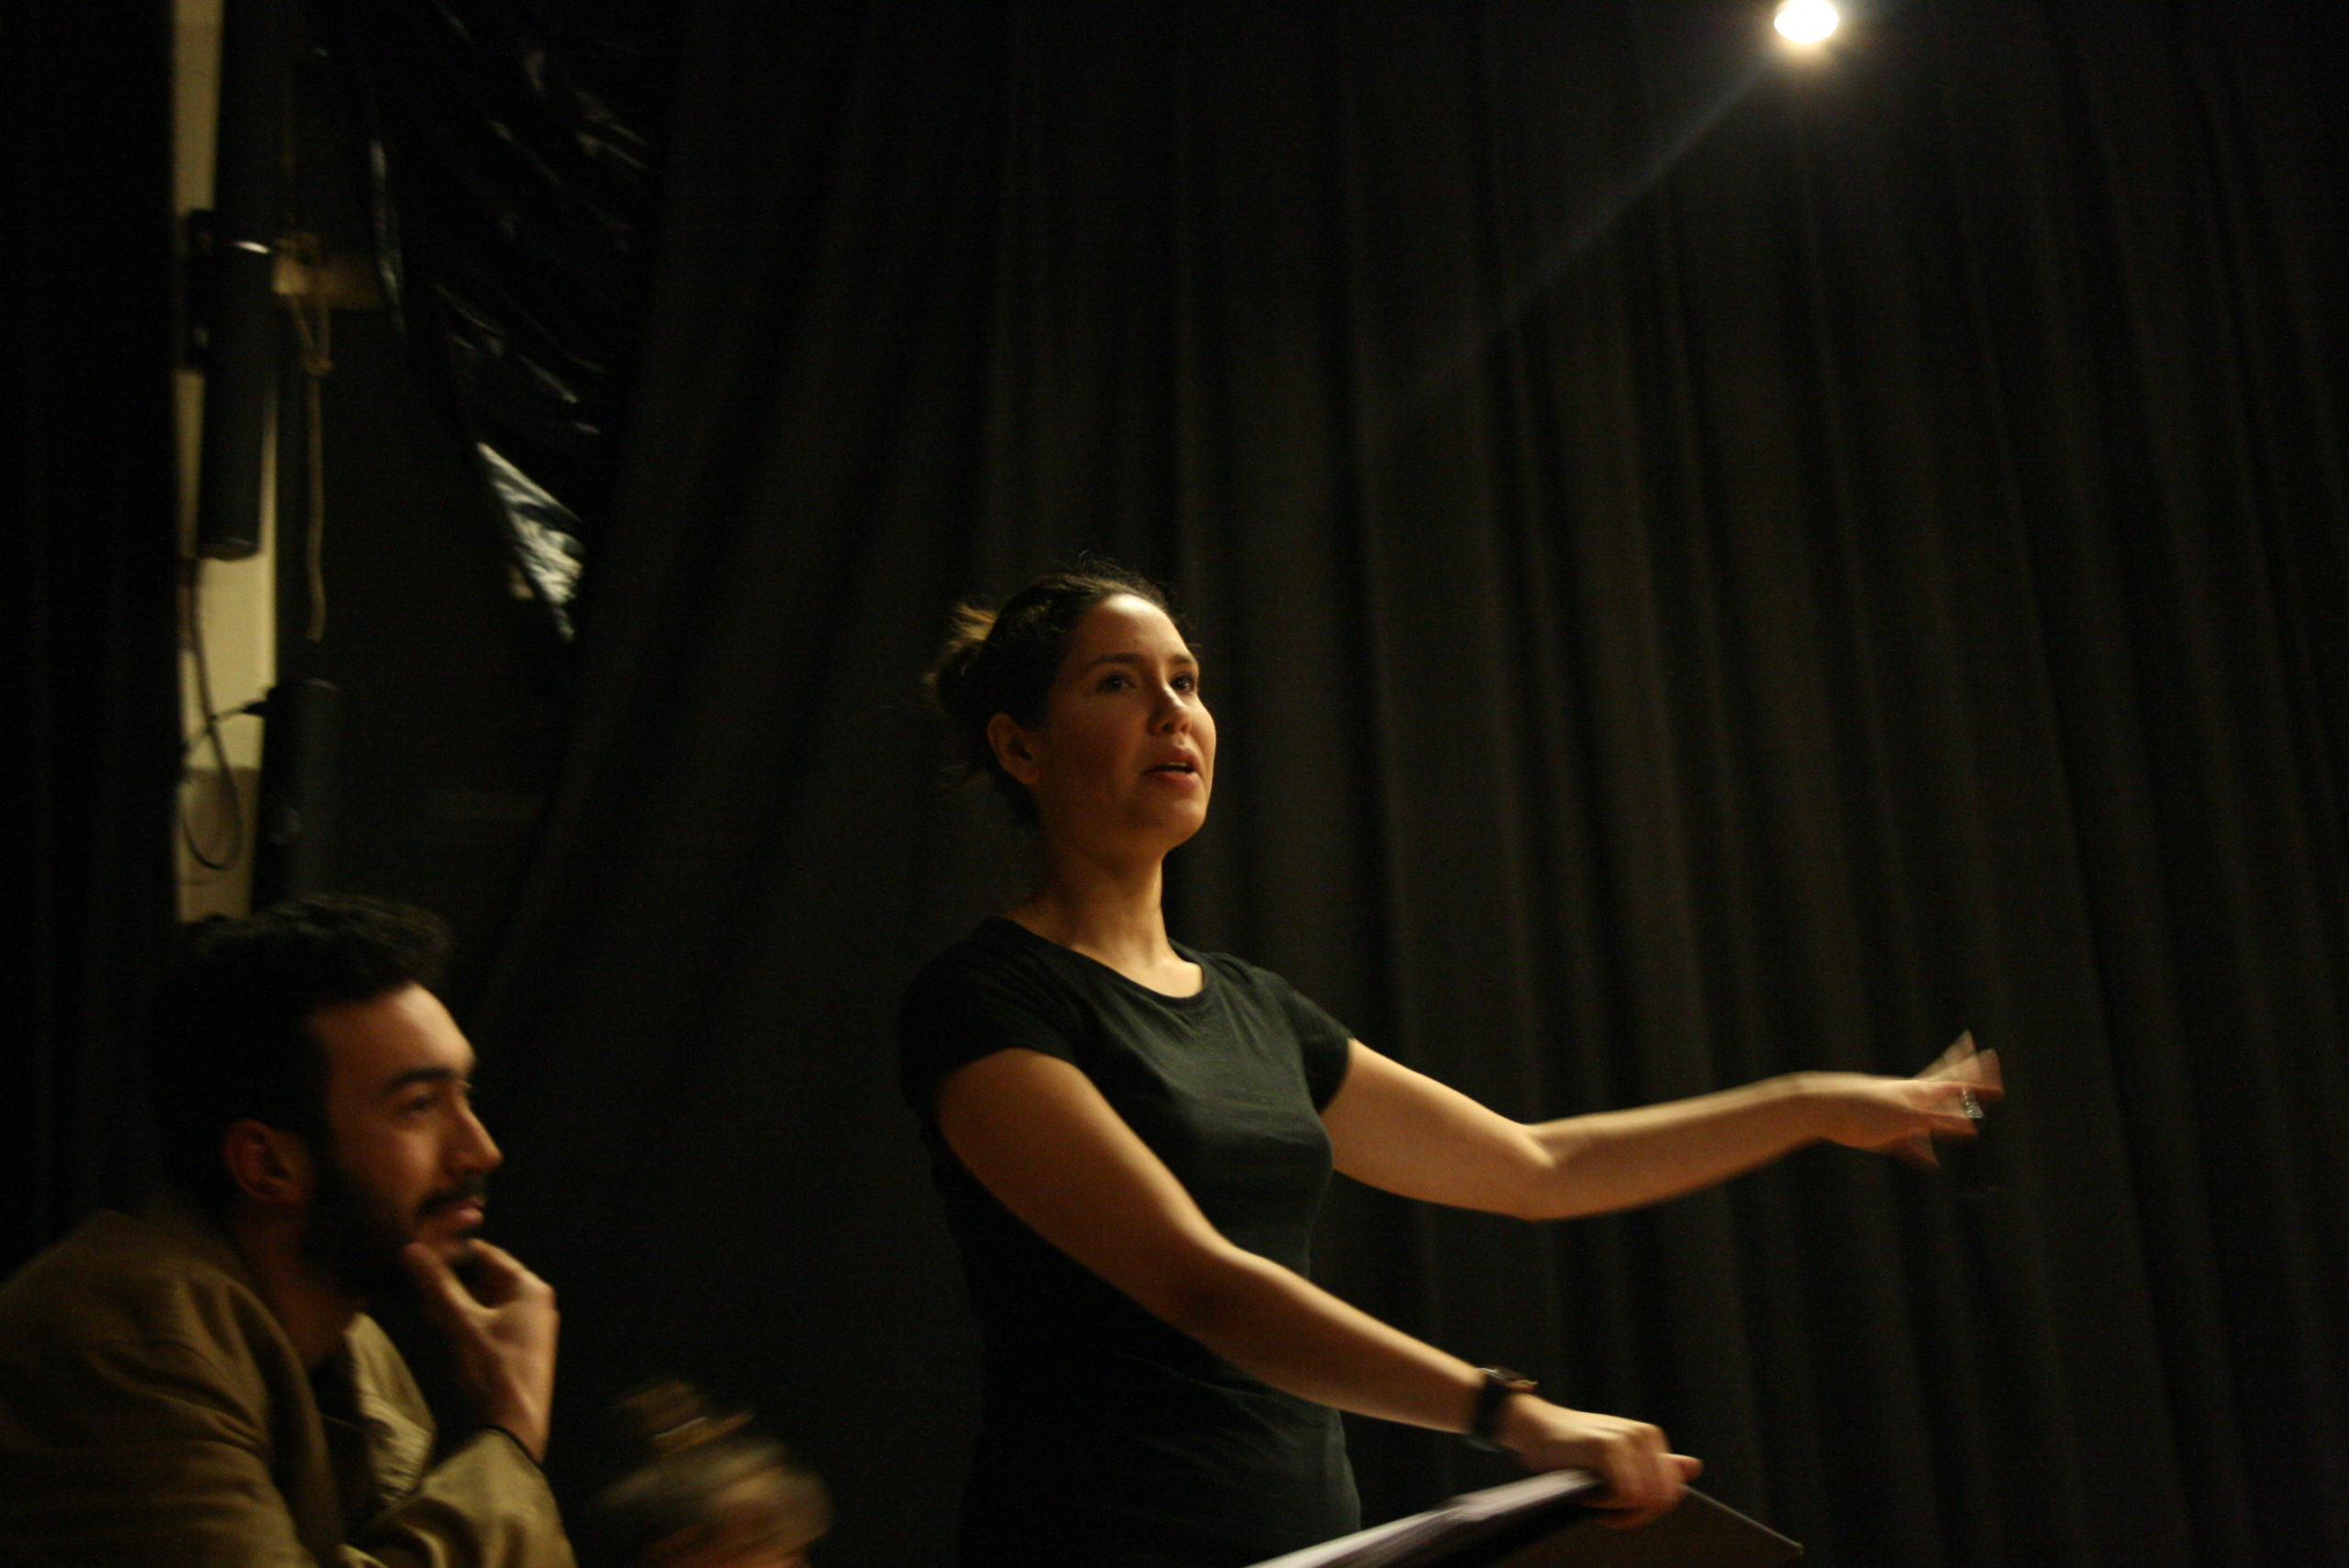 Photo from the show "Skin of our Teeth". A female actor, probably backstage, waves at someone. At the left of the photo, behind her, a man, touching his chin.